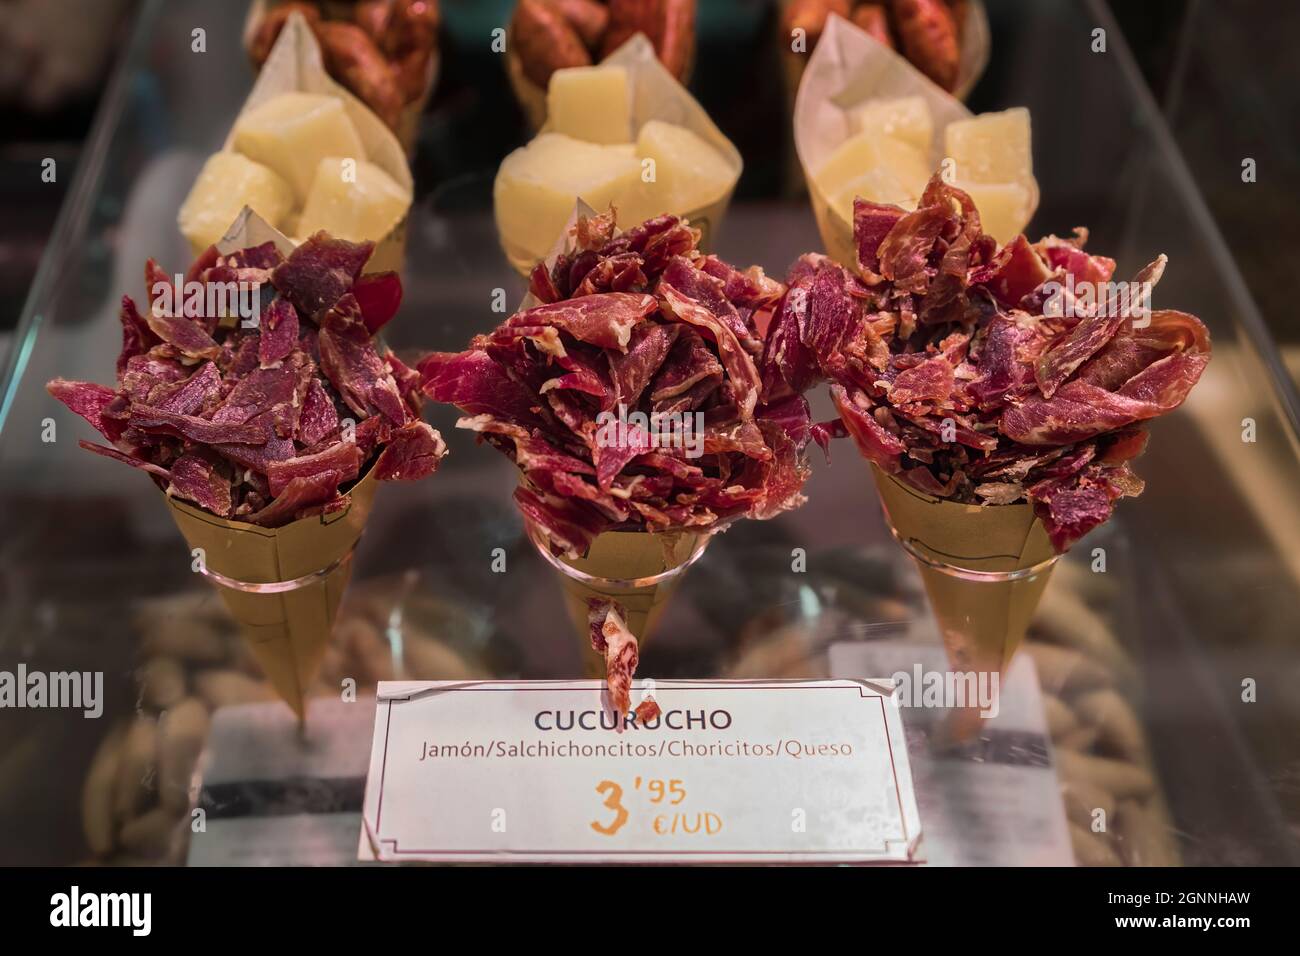 Cones or cucurucho pintxos or tapas with Spanish serrano iberico ham carvings, sausage and cheese pieces at a local butcher shop in Pamplona Spain Stock Photo